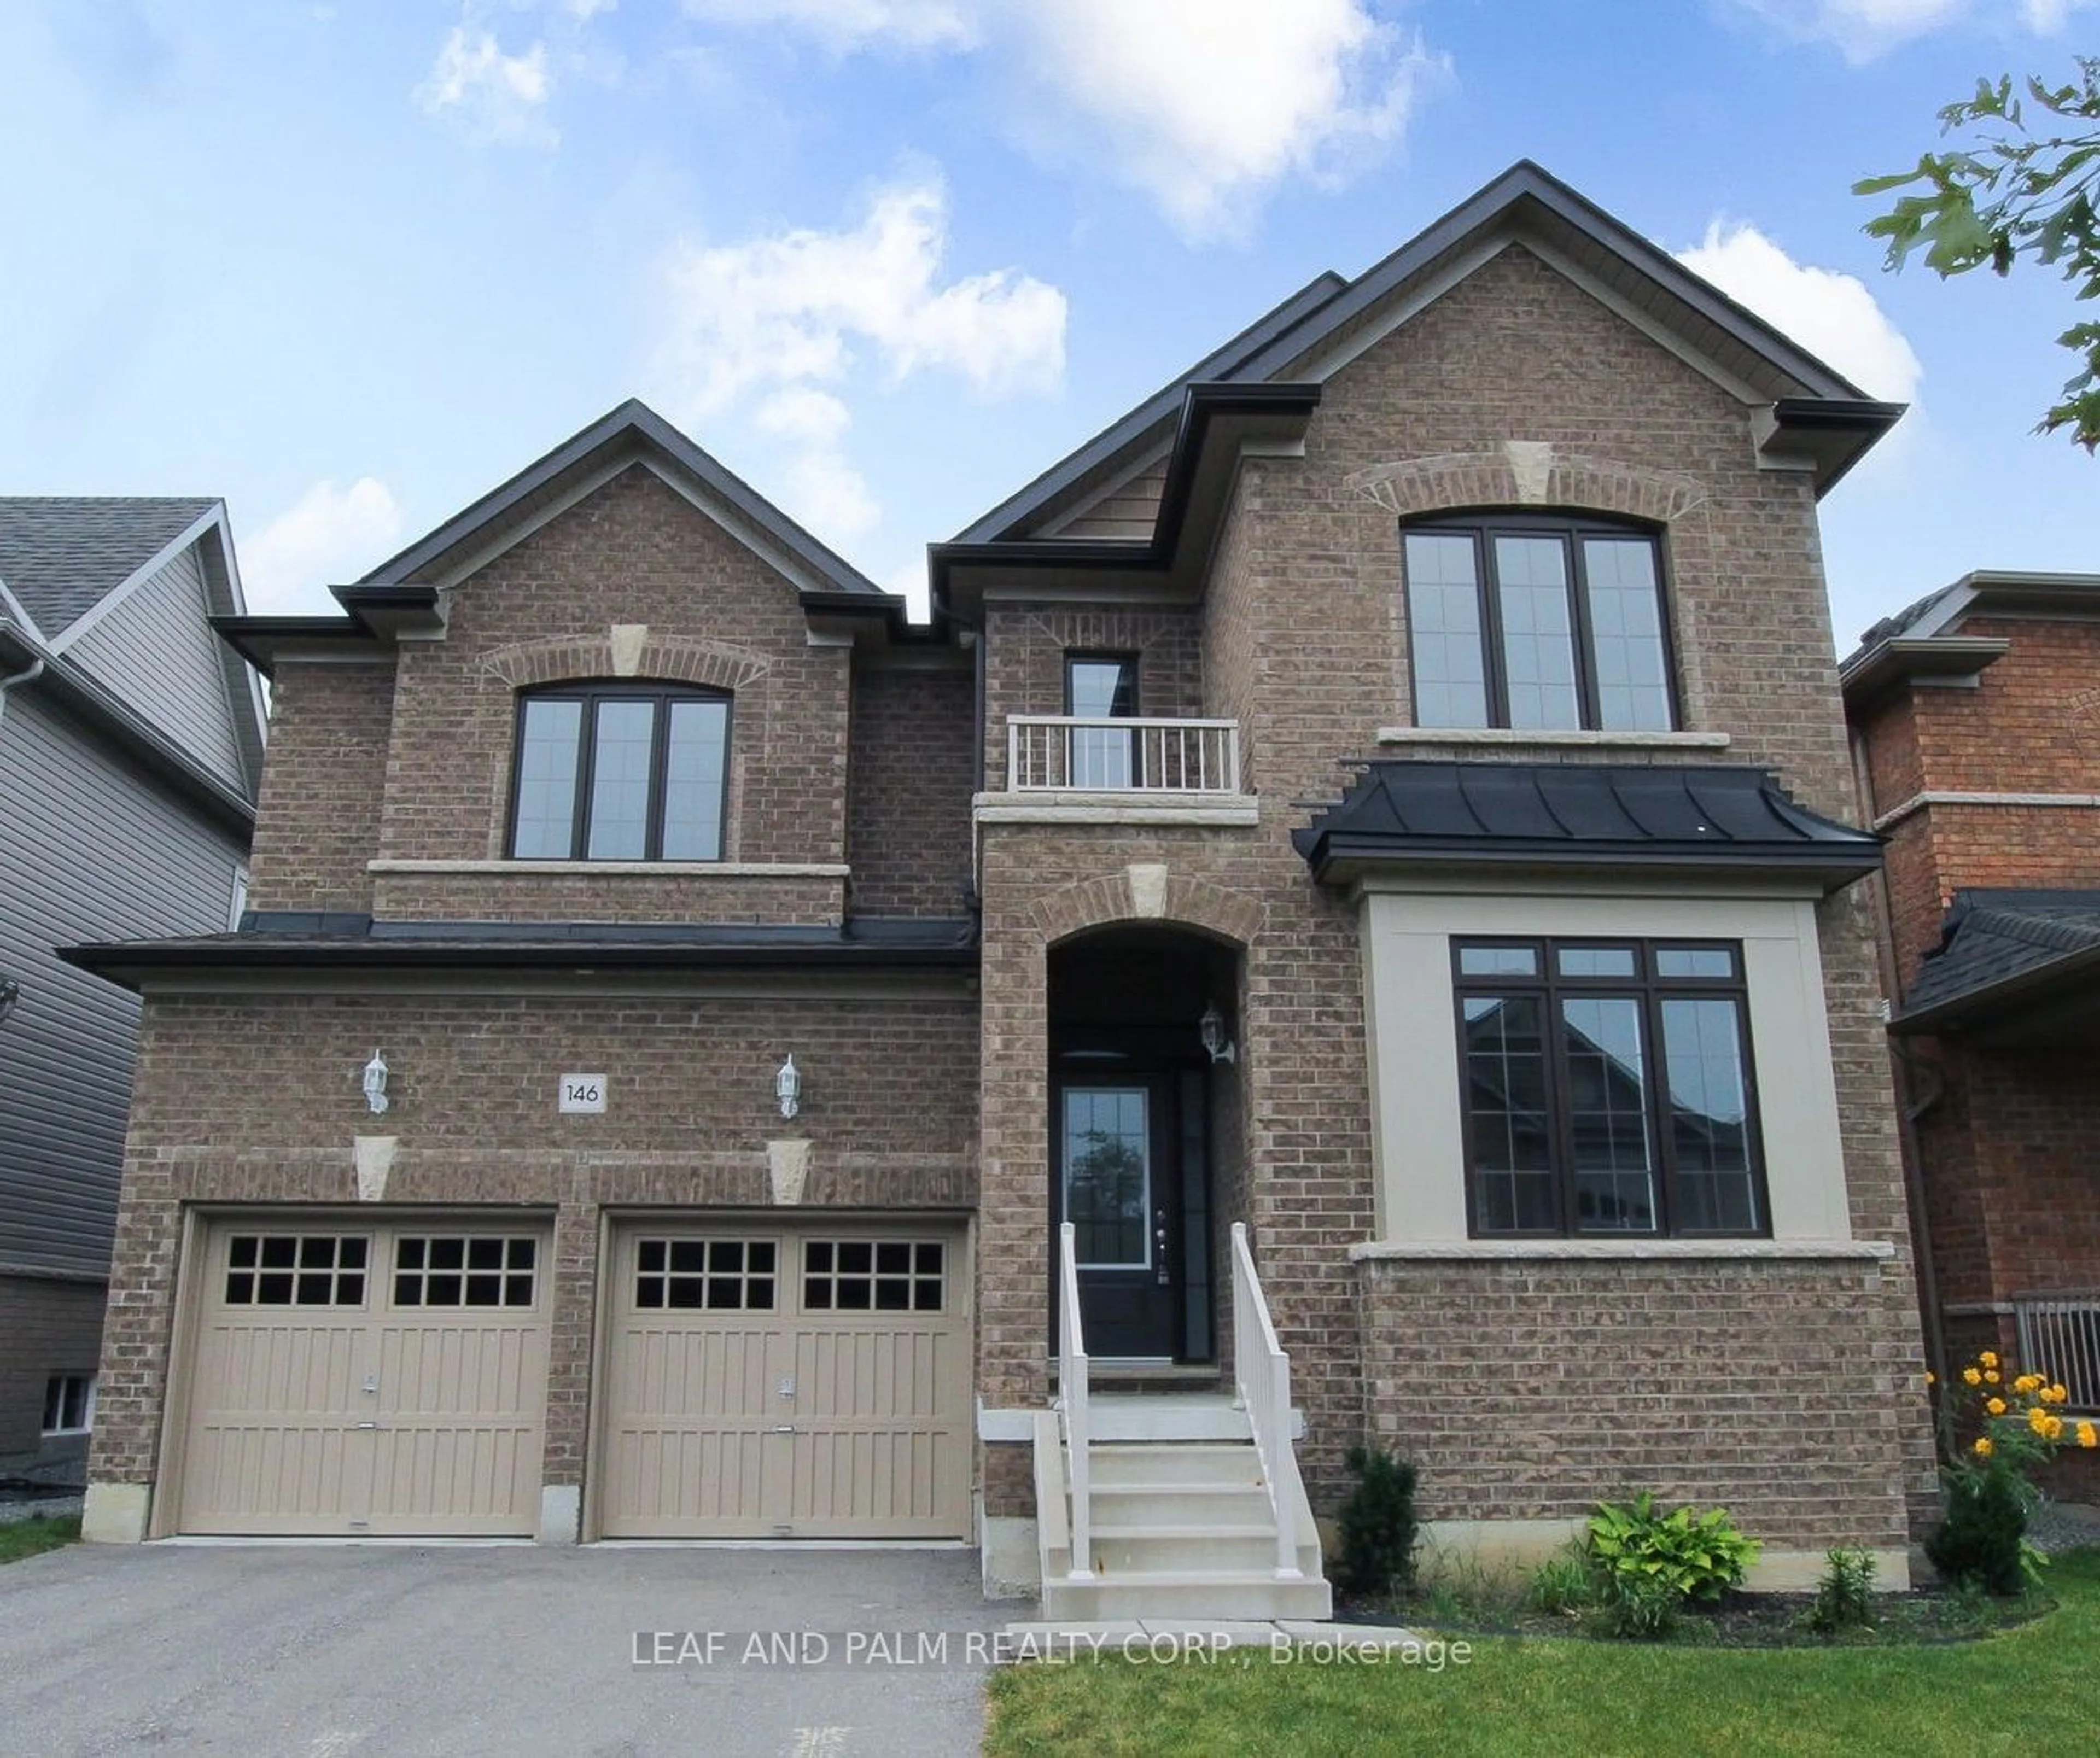 Home with brick exterior material for 146 Crombie St, Clarington Ontario L1C 3K2